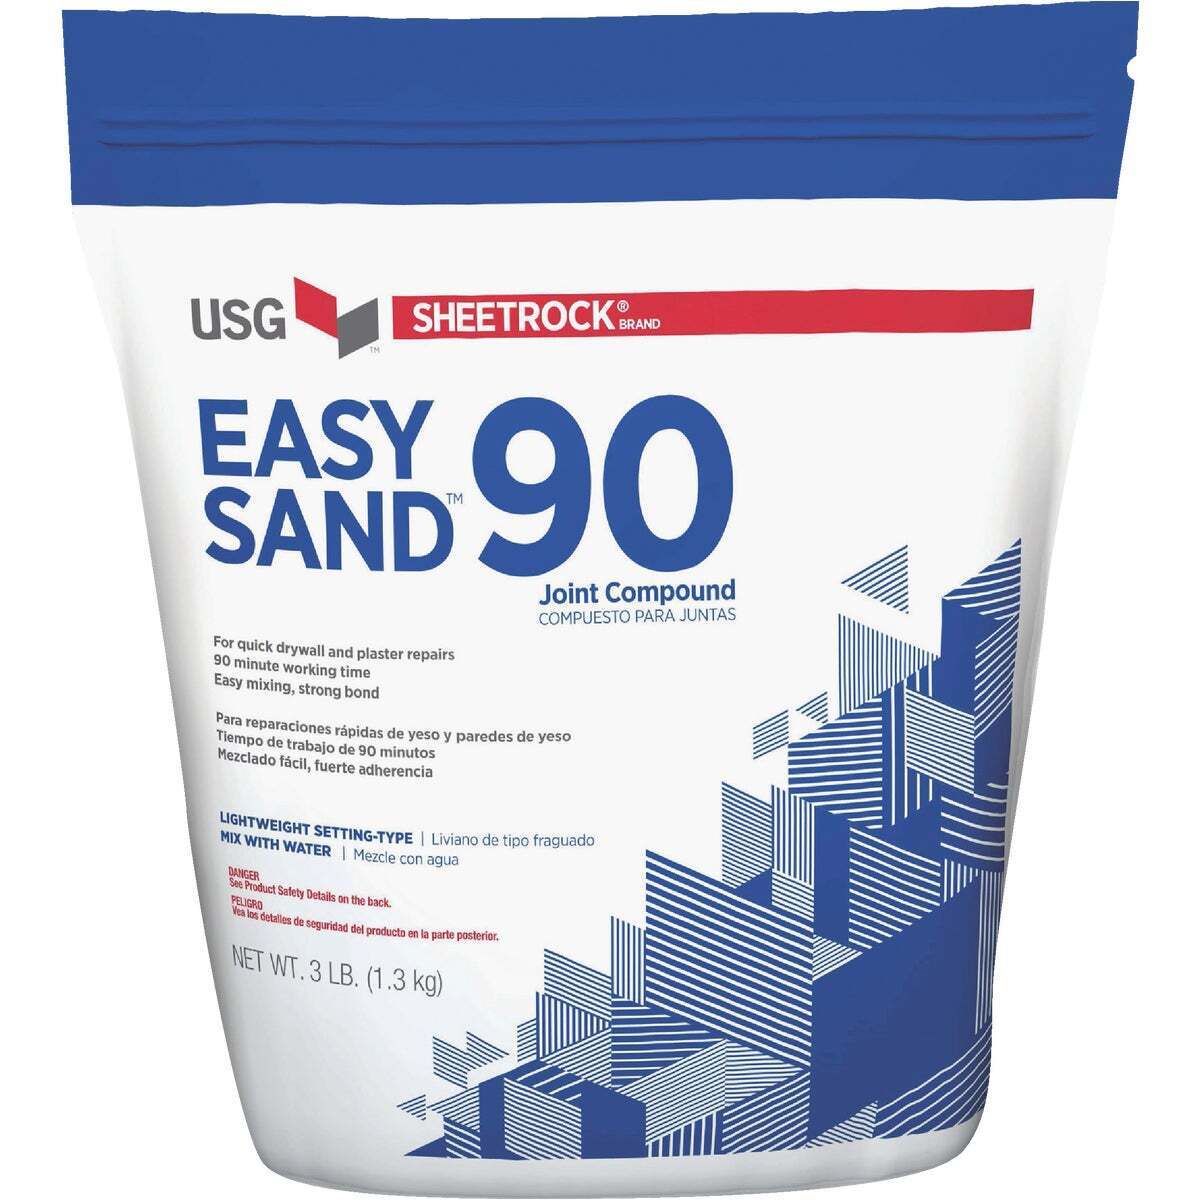 Sheetrock Easy Sand 90 Lightweight Setting Type 3 Lb. Drywall Joint Compound